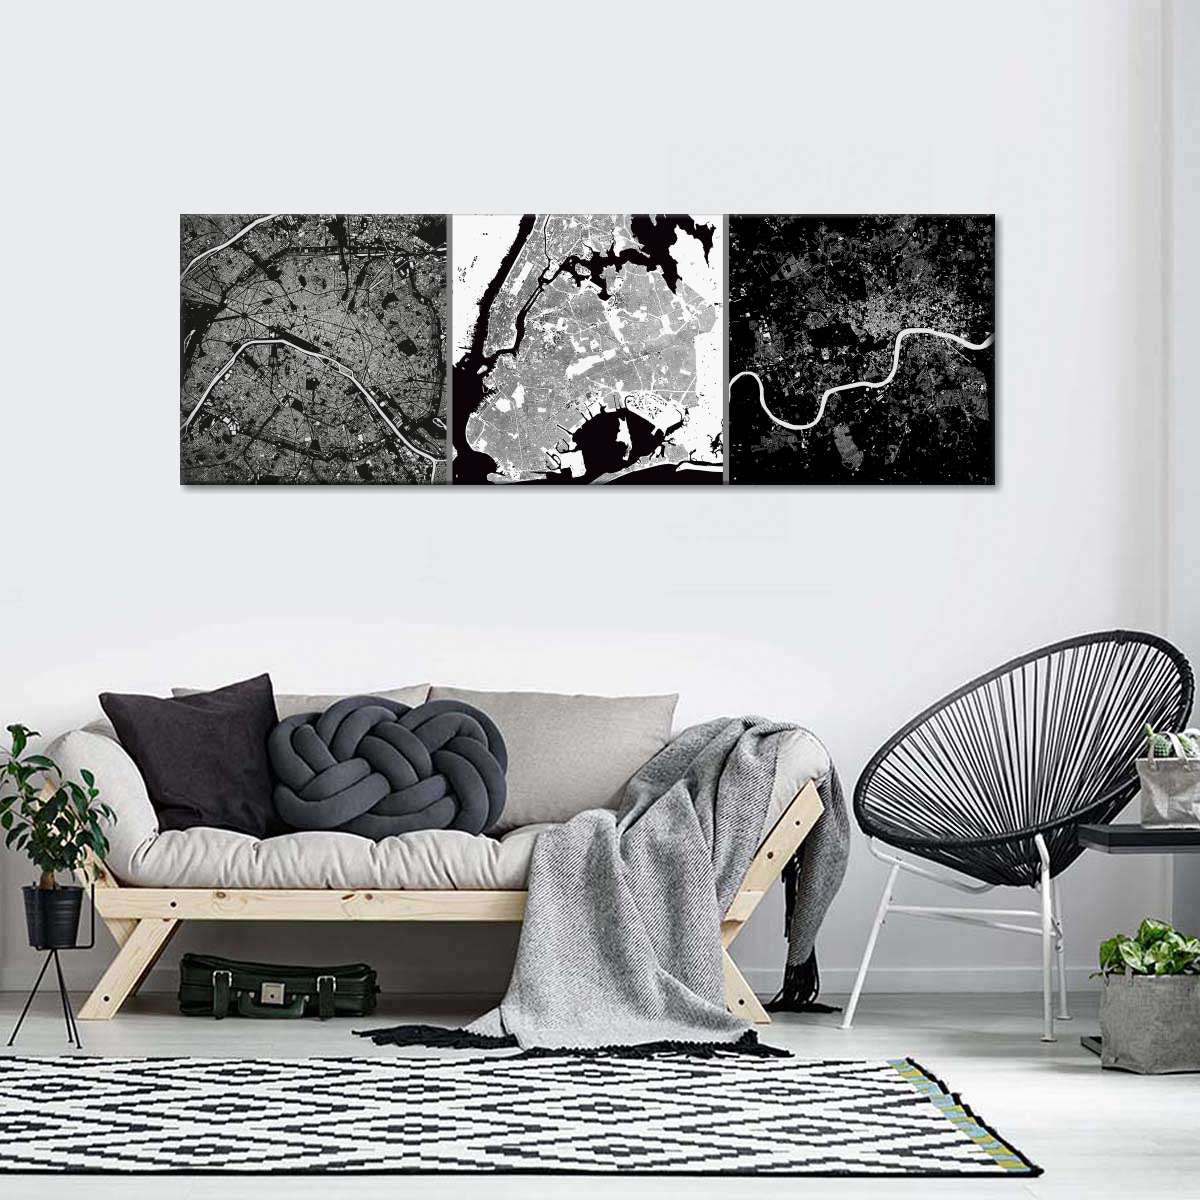 Black and White Wall Art Ideas